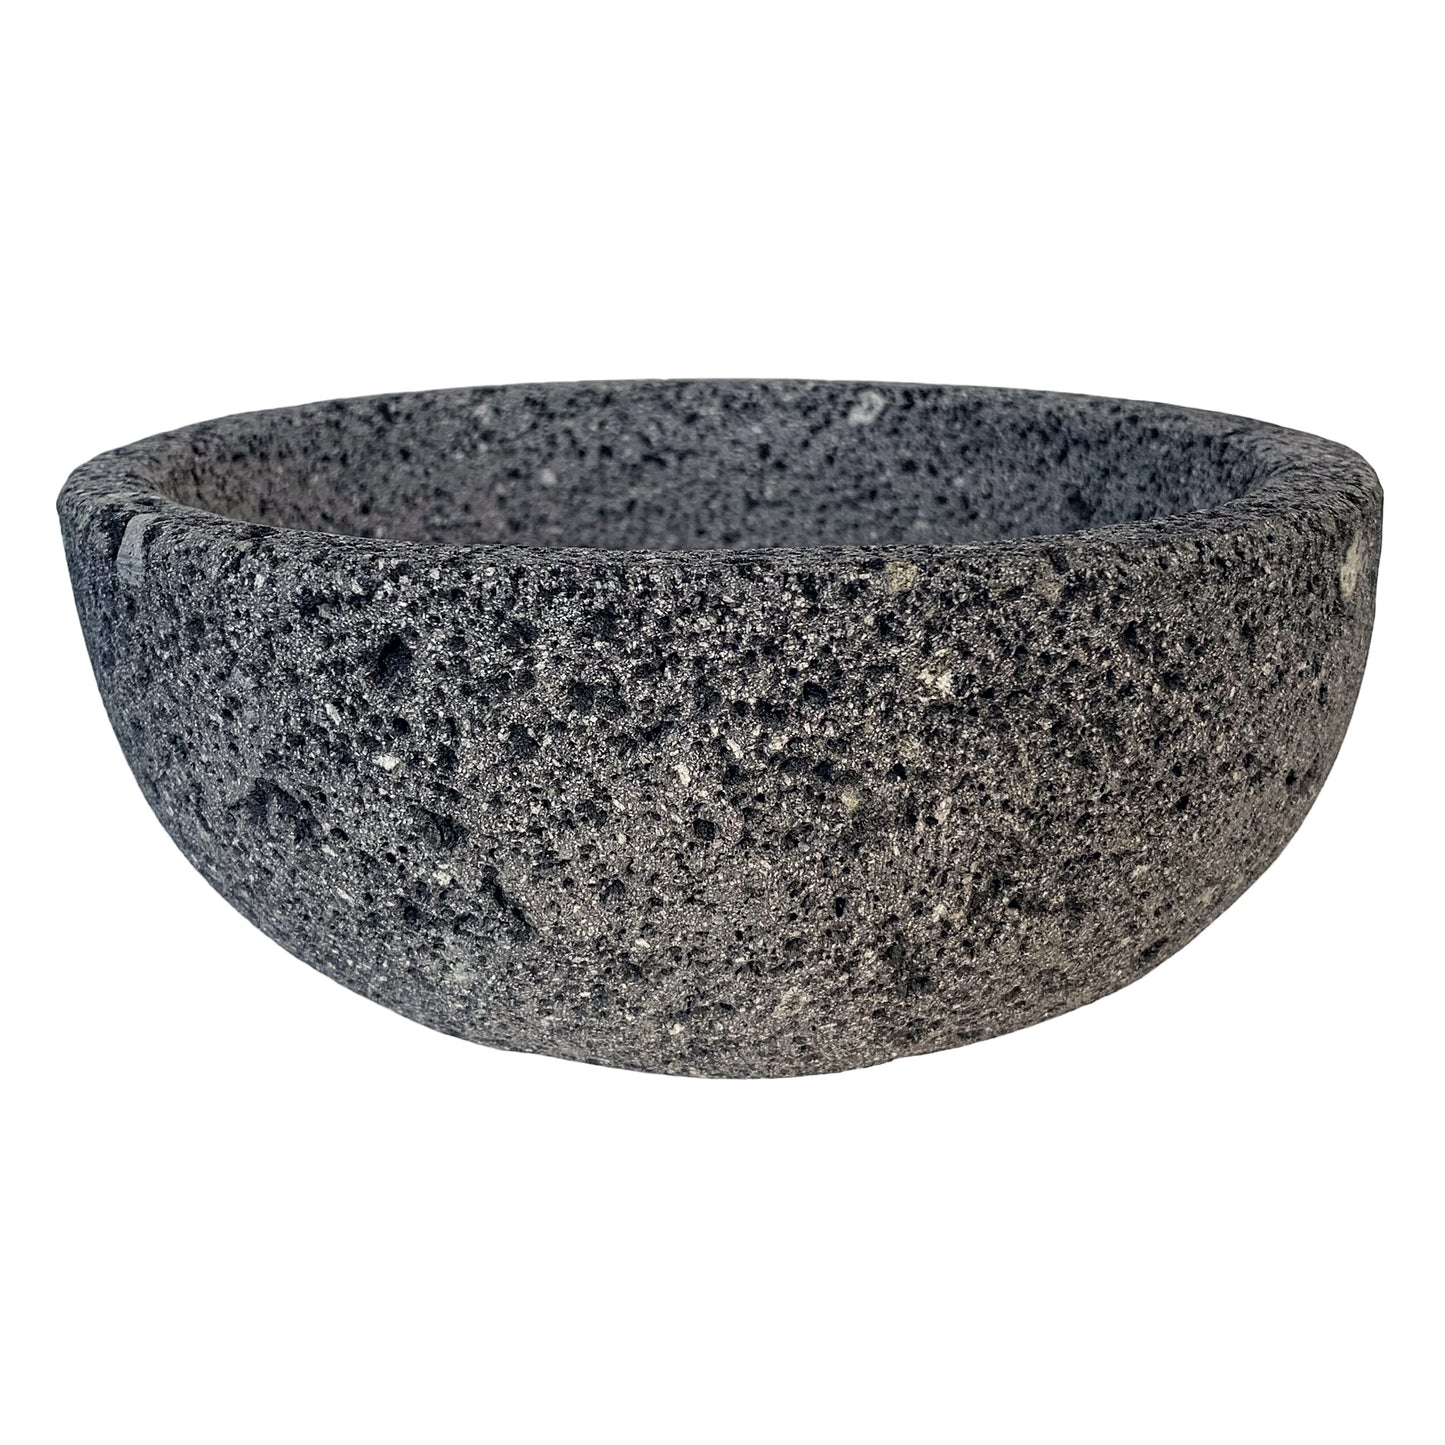 Small (8 inch) Mexican Molcajete Bowl  Hand-carved 100% Volcanic Ston –  The Curated Pantry